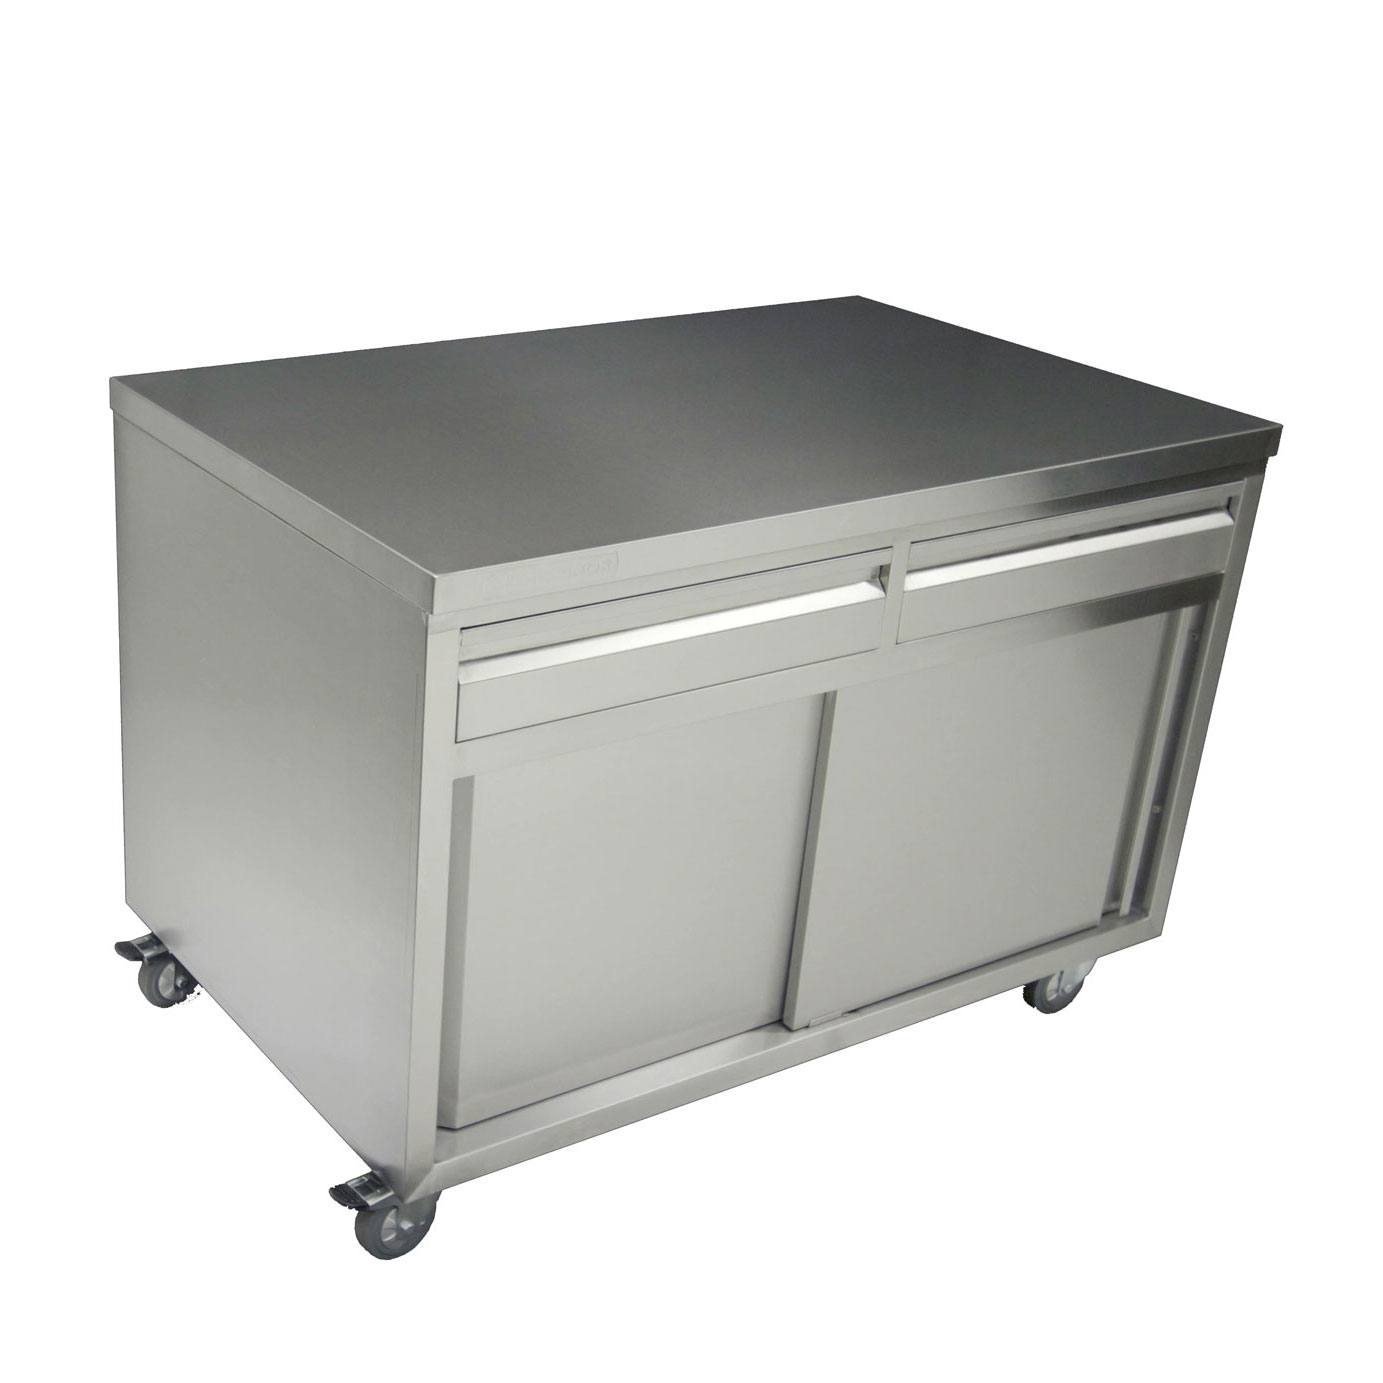 Thorinox TCAD-2436-SS Stainless Storage Cabinet, 36"W x 24"D x 34"H, with sliding doors and (2) drawers